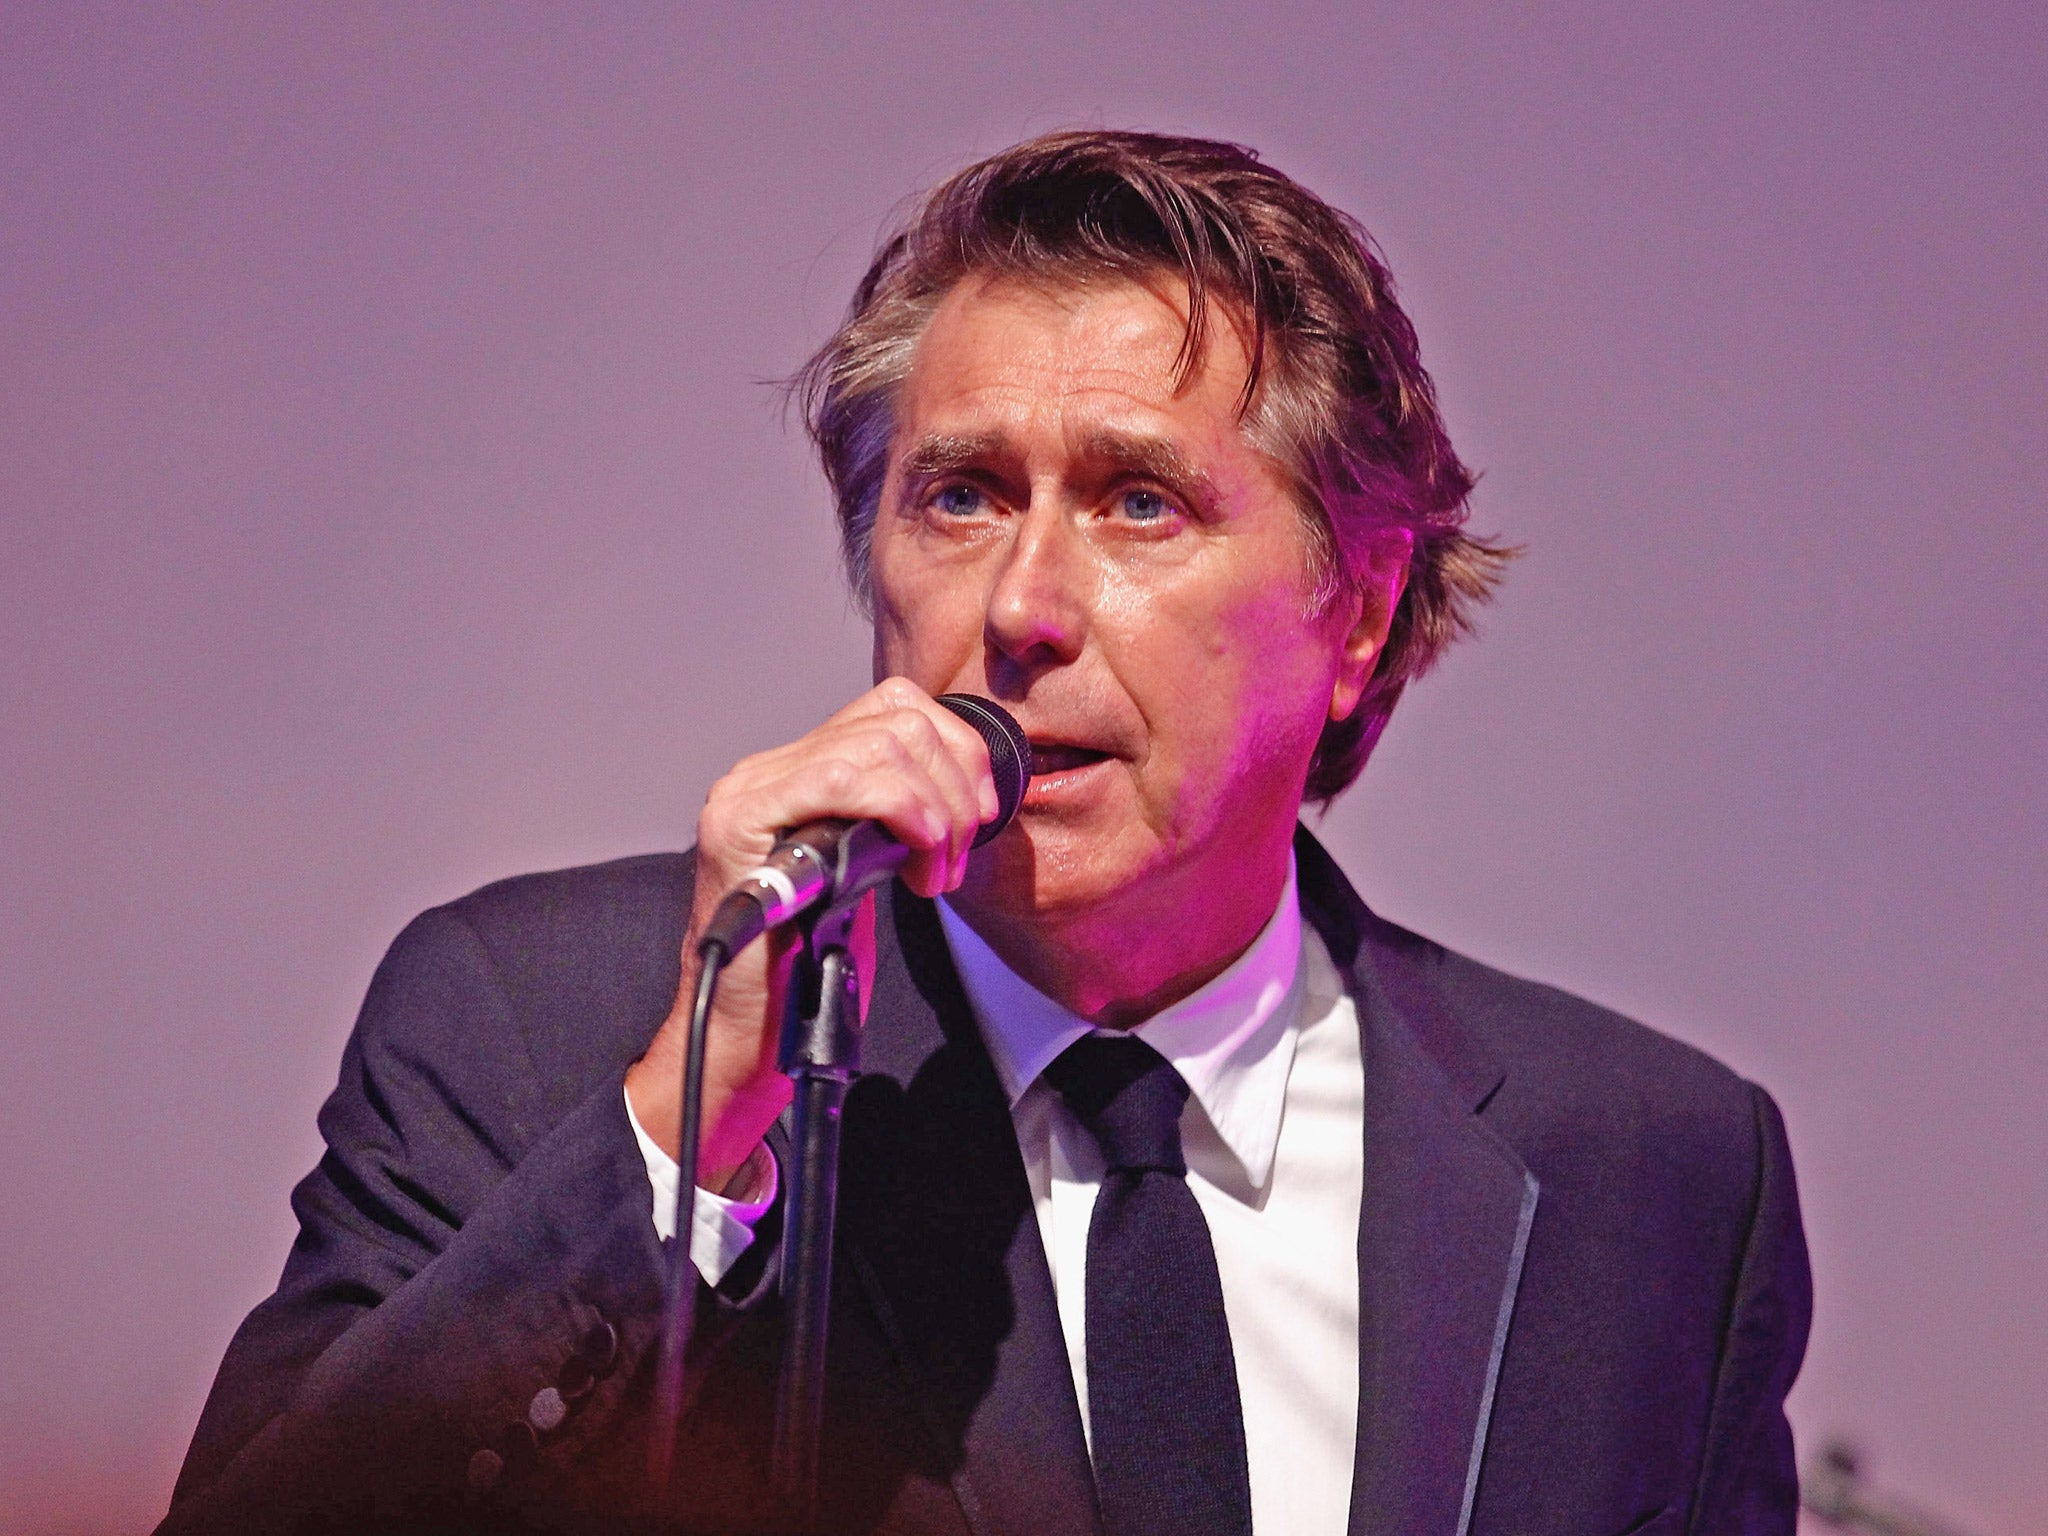 Singer Bryan Ferry performs on stage